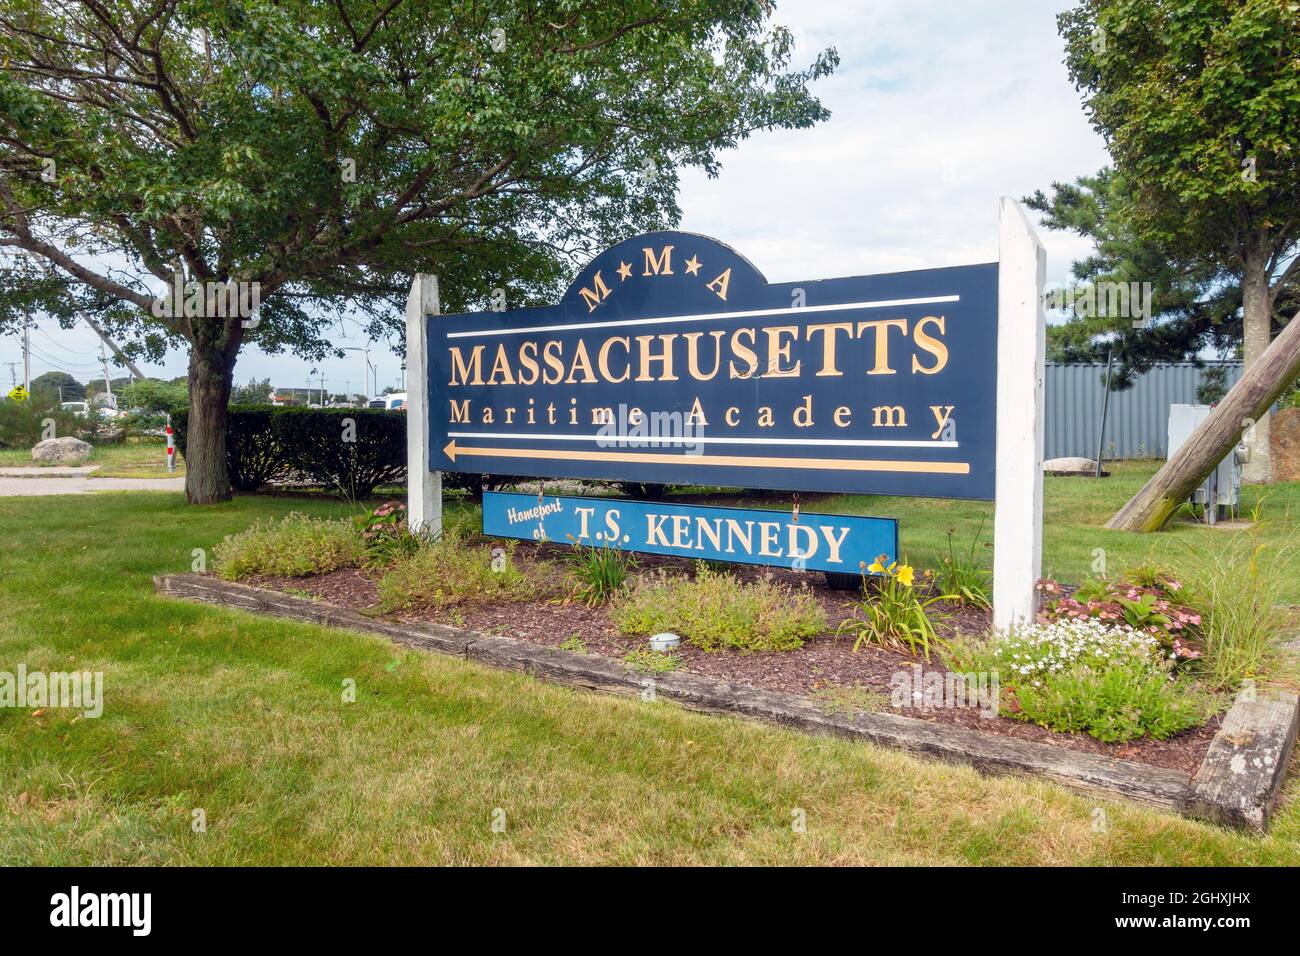 Massachusetts Maritime Academy known as MMA sign in summer Stock Photo